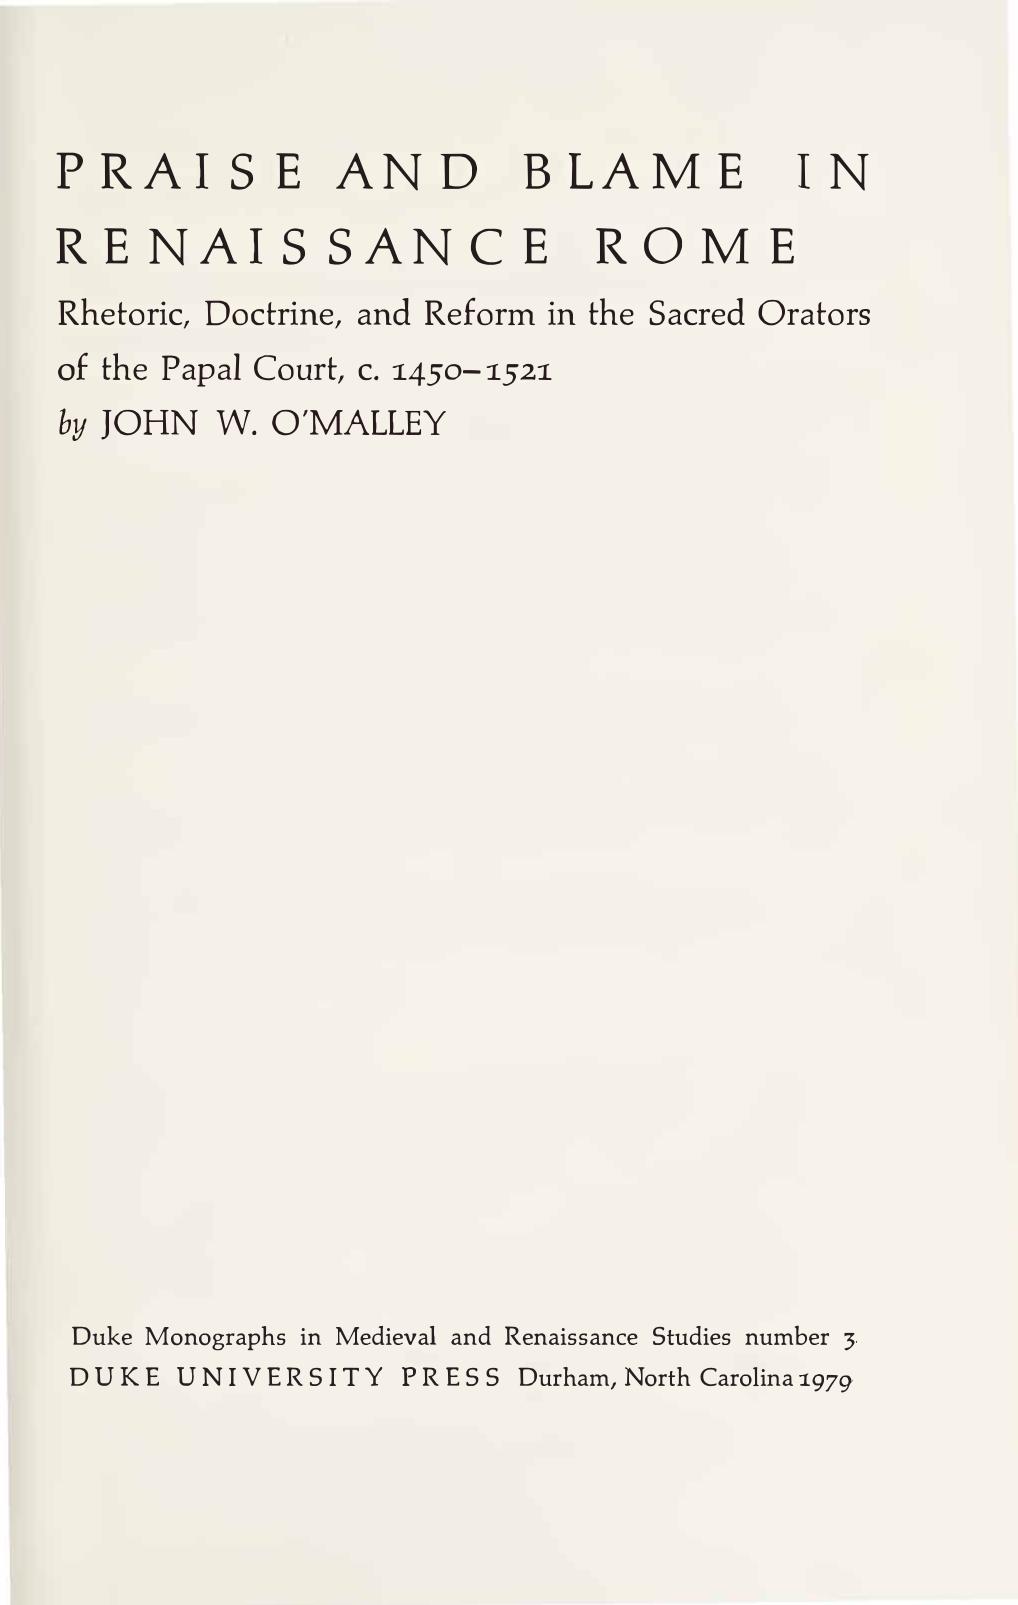 Praise and Blame in Renaissance Rome - Rhetoric, Doctrine, and Reform in Sacred Orators of Papal Court, c. 1450-1521 by John W. O’Malley